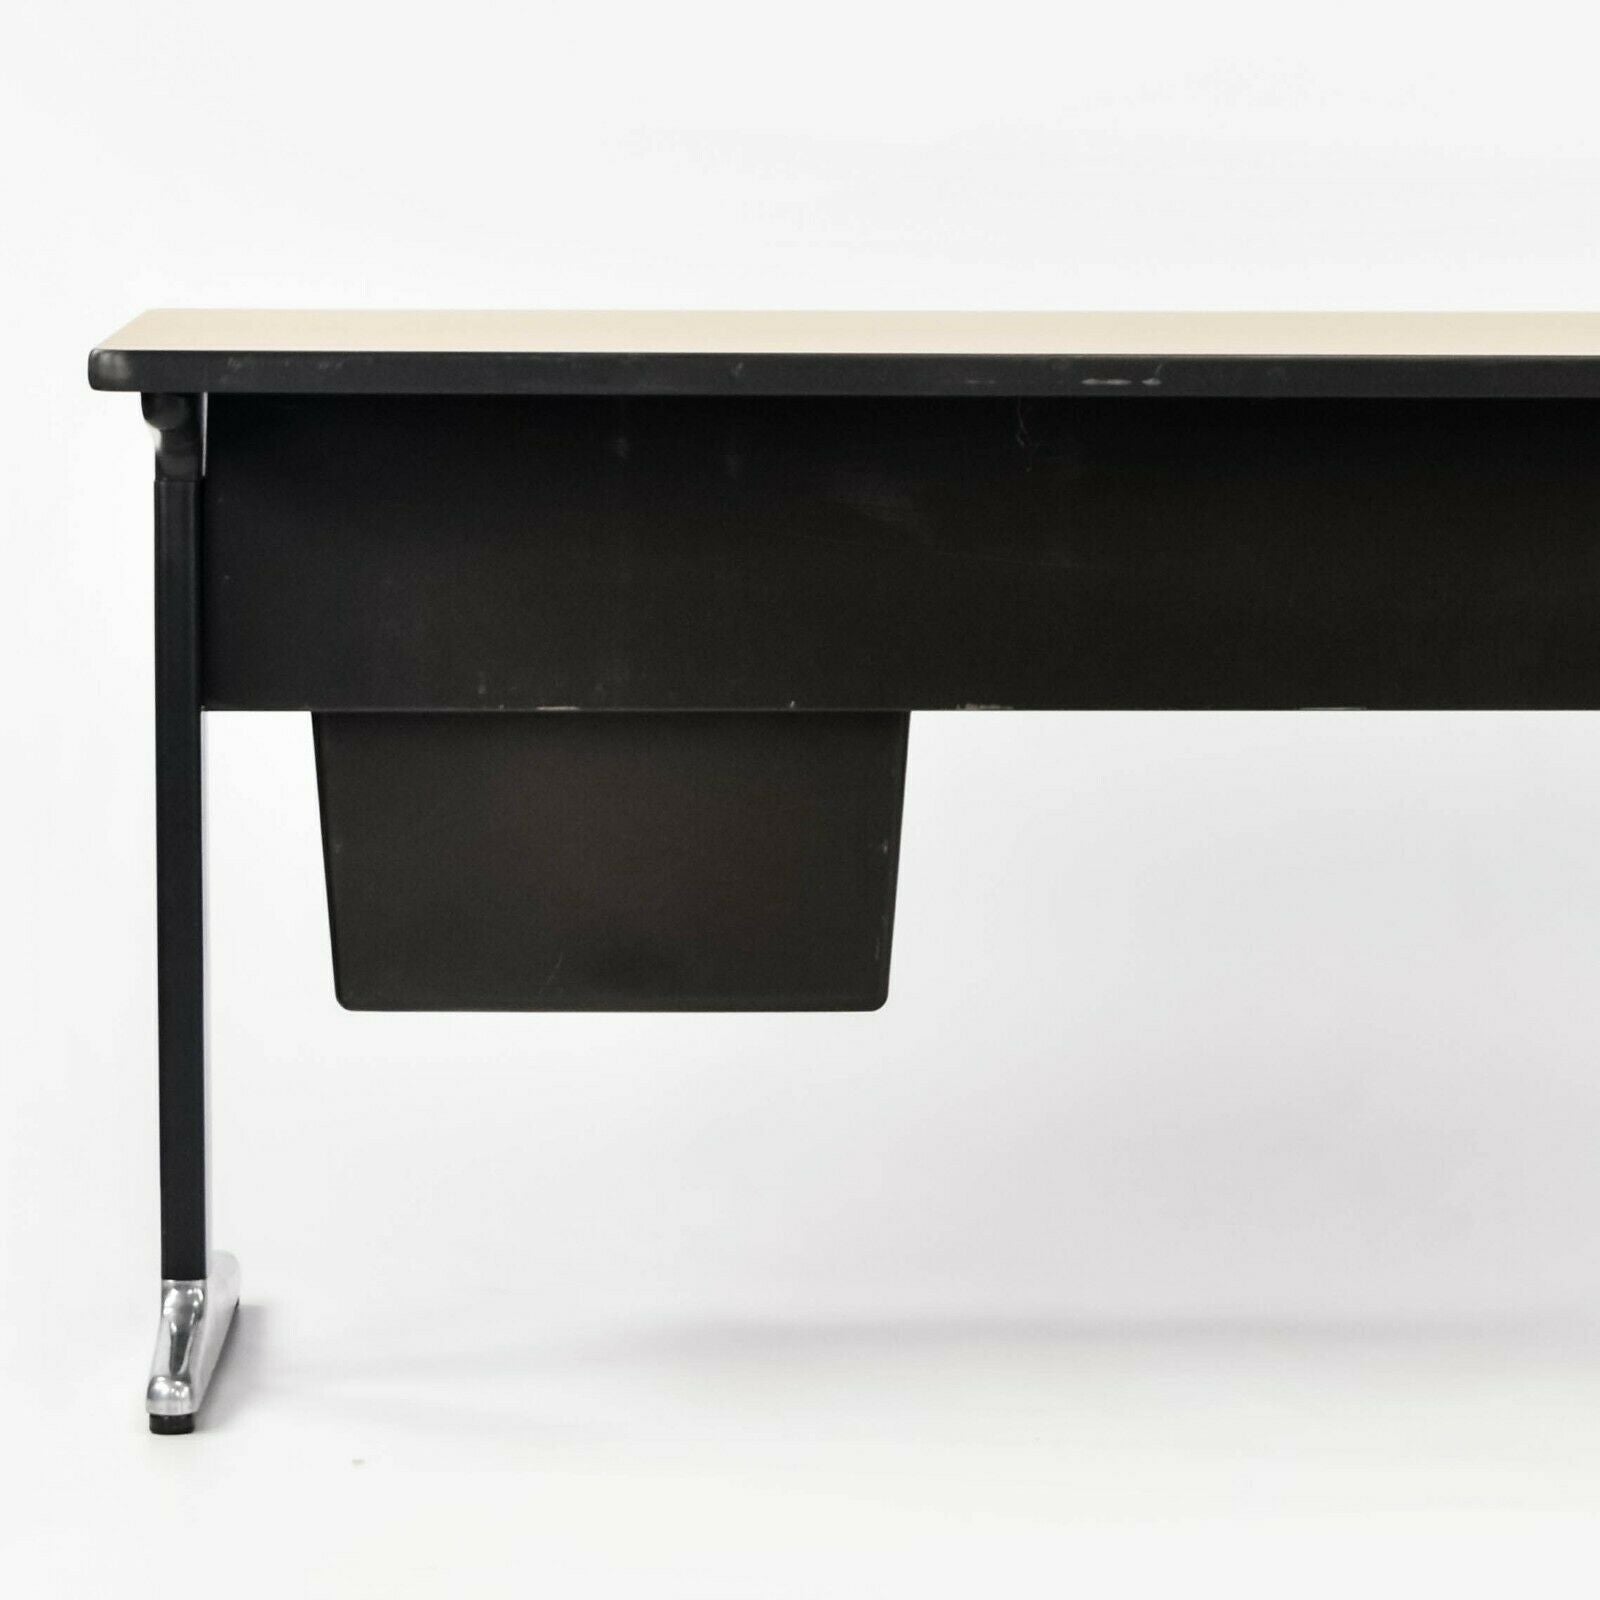 1970s 6ft George Nelson & Robert Probst Herman Miller Action Office Desk with Drawers